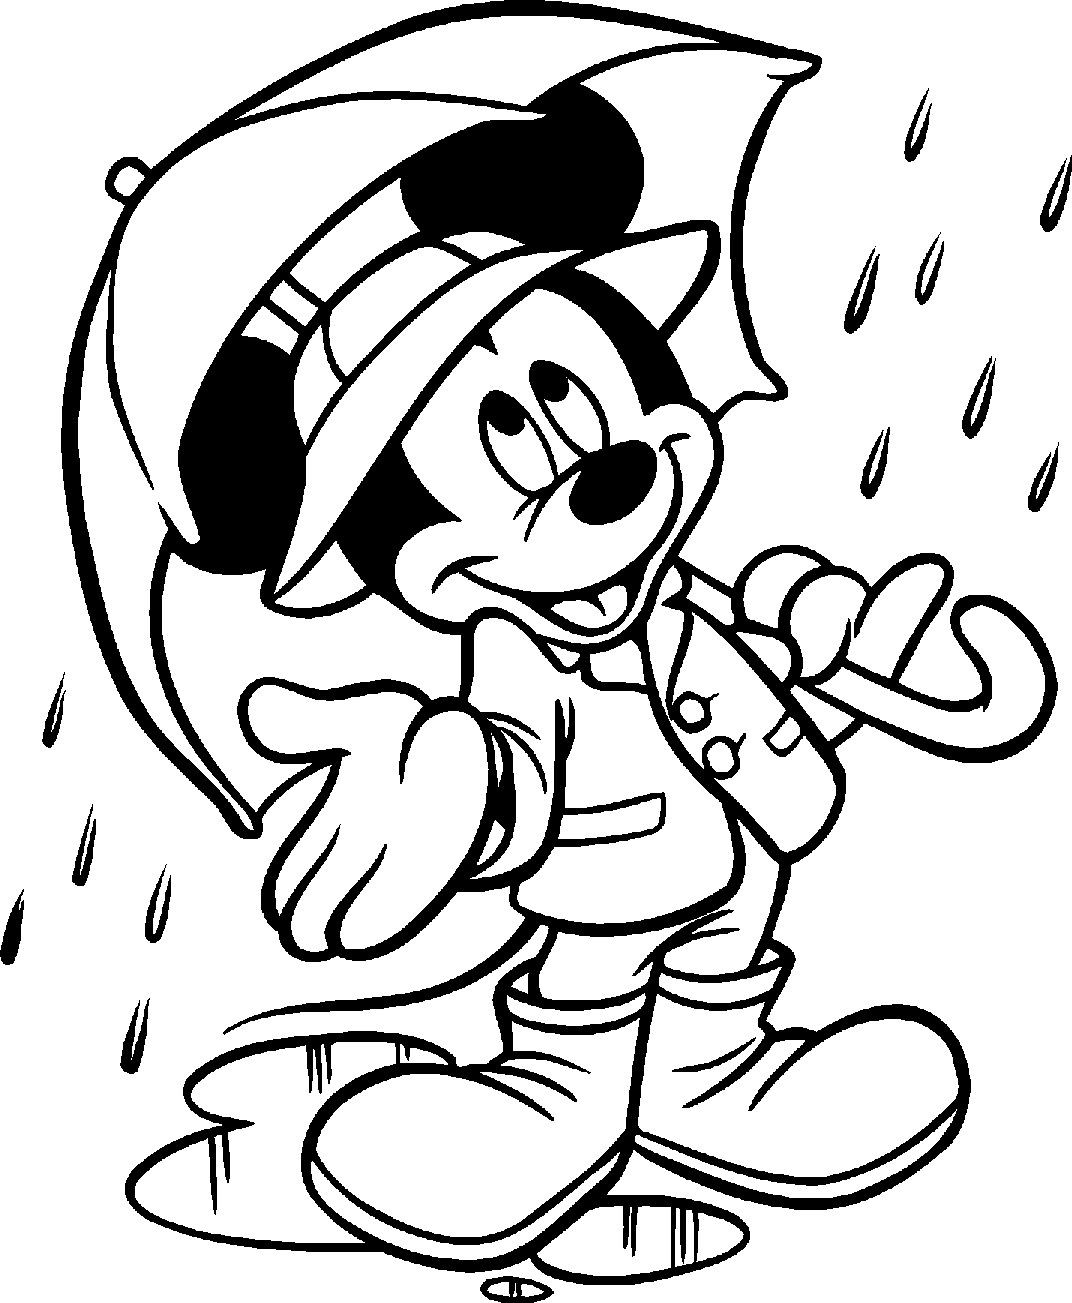 Coloring Pages For Kids Mickey Mouse
 Free Printable Mickey Mouse Coloring Pages For Kids